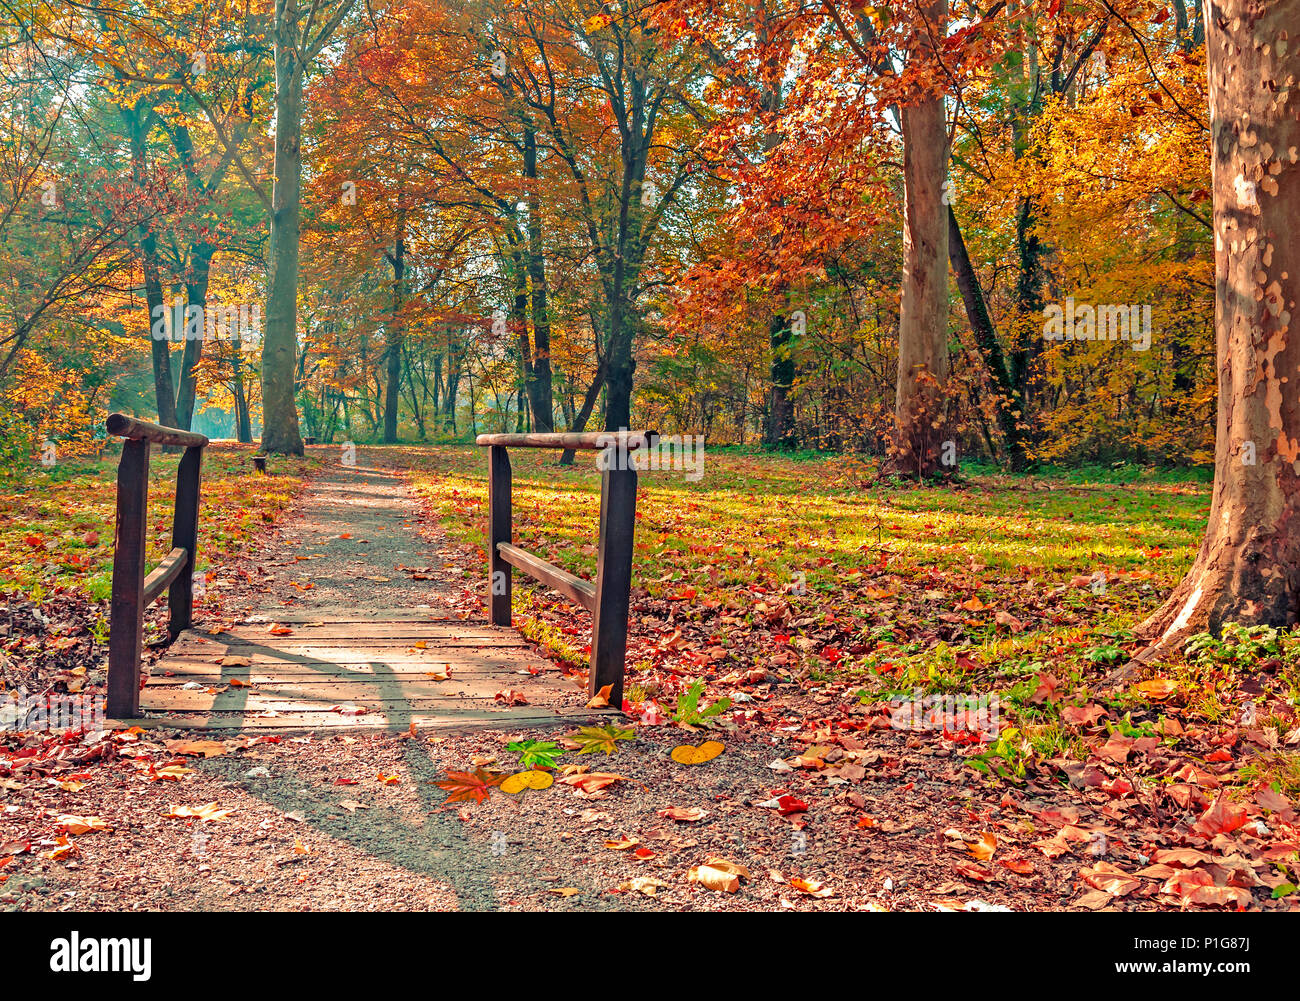 Autumn forest with small wooden bridge Stock Photo